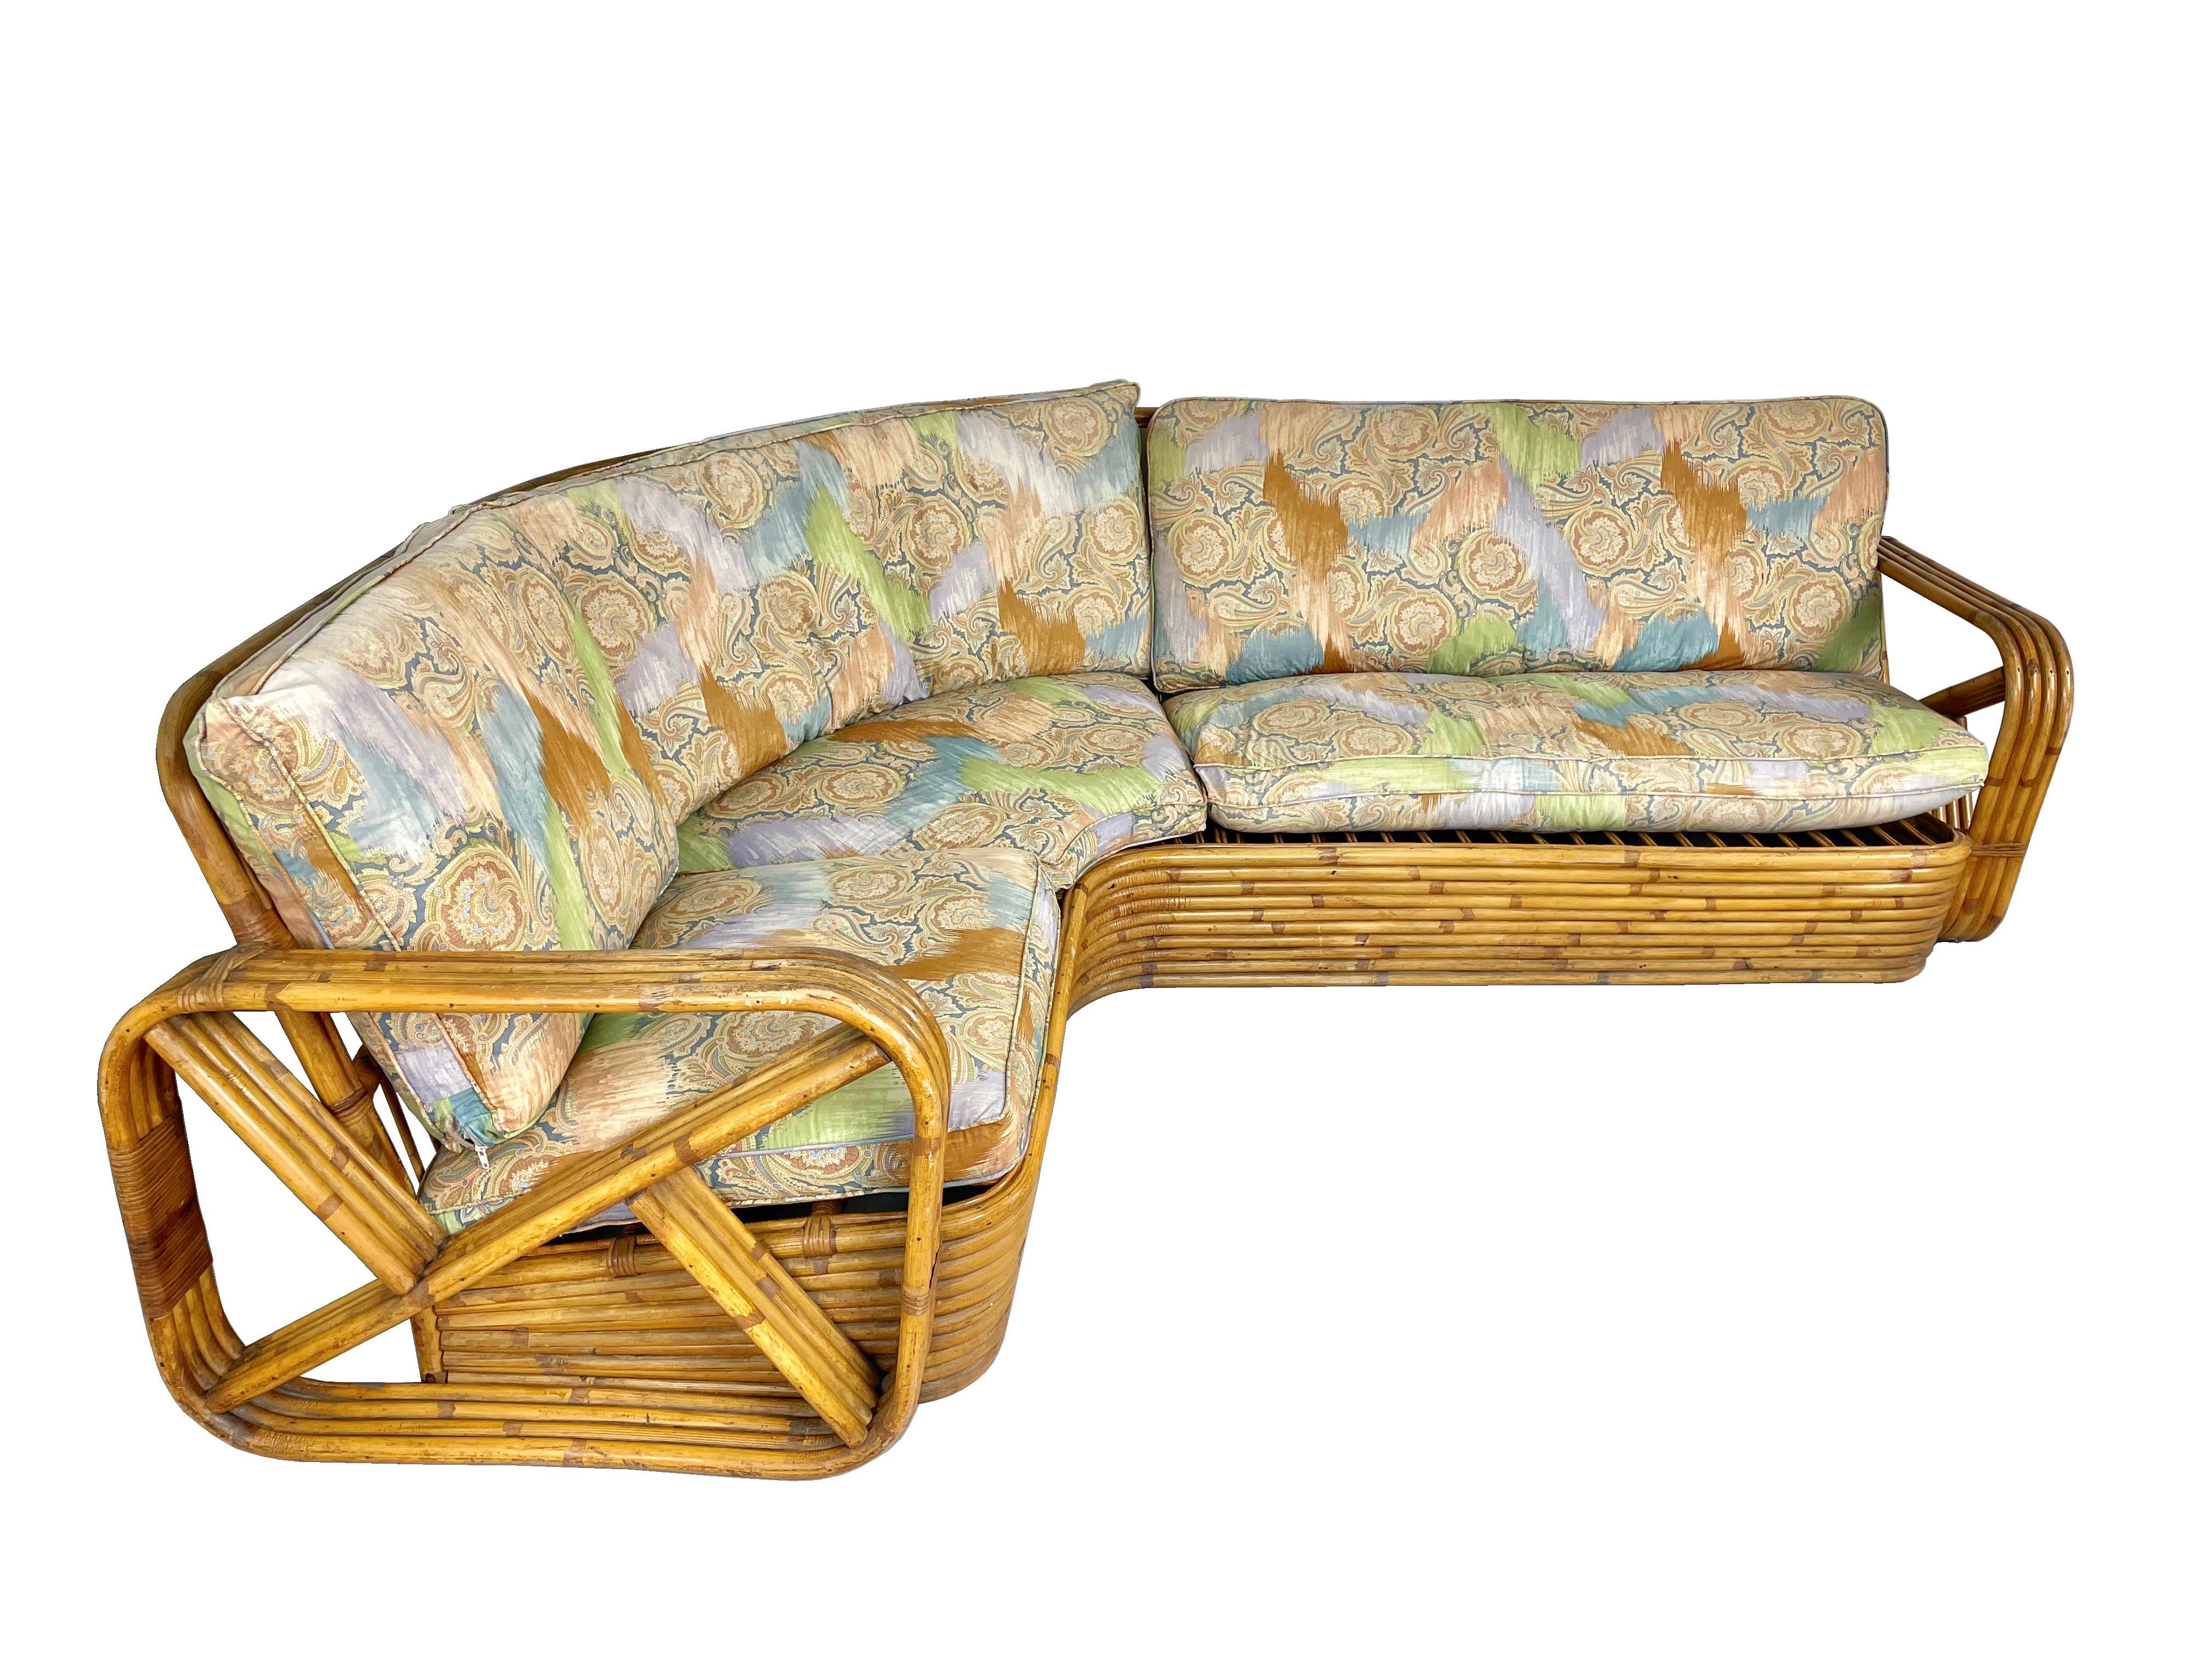 Pretzel corner rattan sofa designed in the manner of Paul Frankl. This unique sofa features a bent rattan base with four-strand square pretzel arms and it is a solid single curved rattan piece. 

The cushions can be made for you under request.